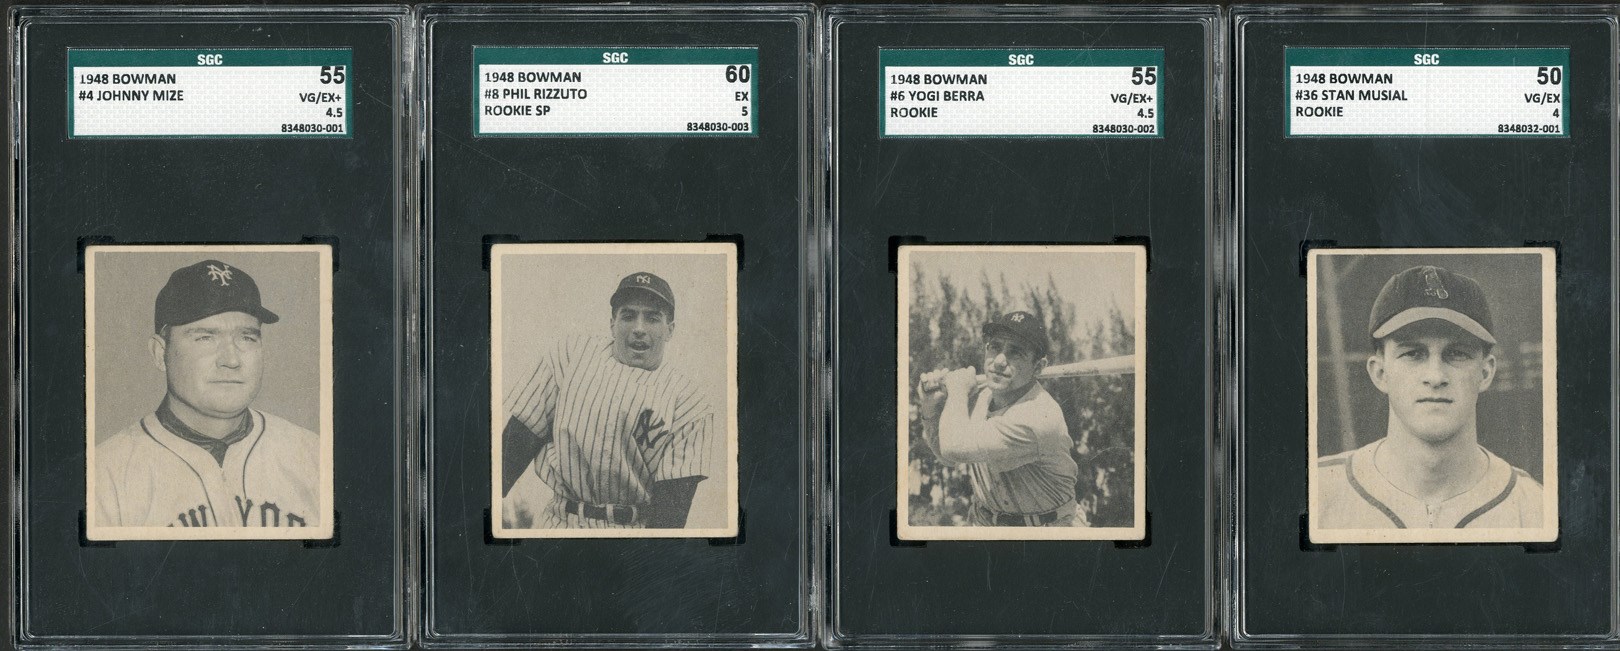 Baseball and Trading Cards - 1948 Bowman Complete Set (48 Cards - 4 SGC Graded)